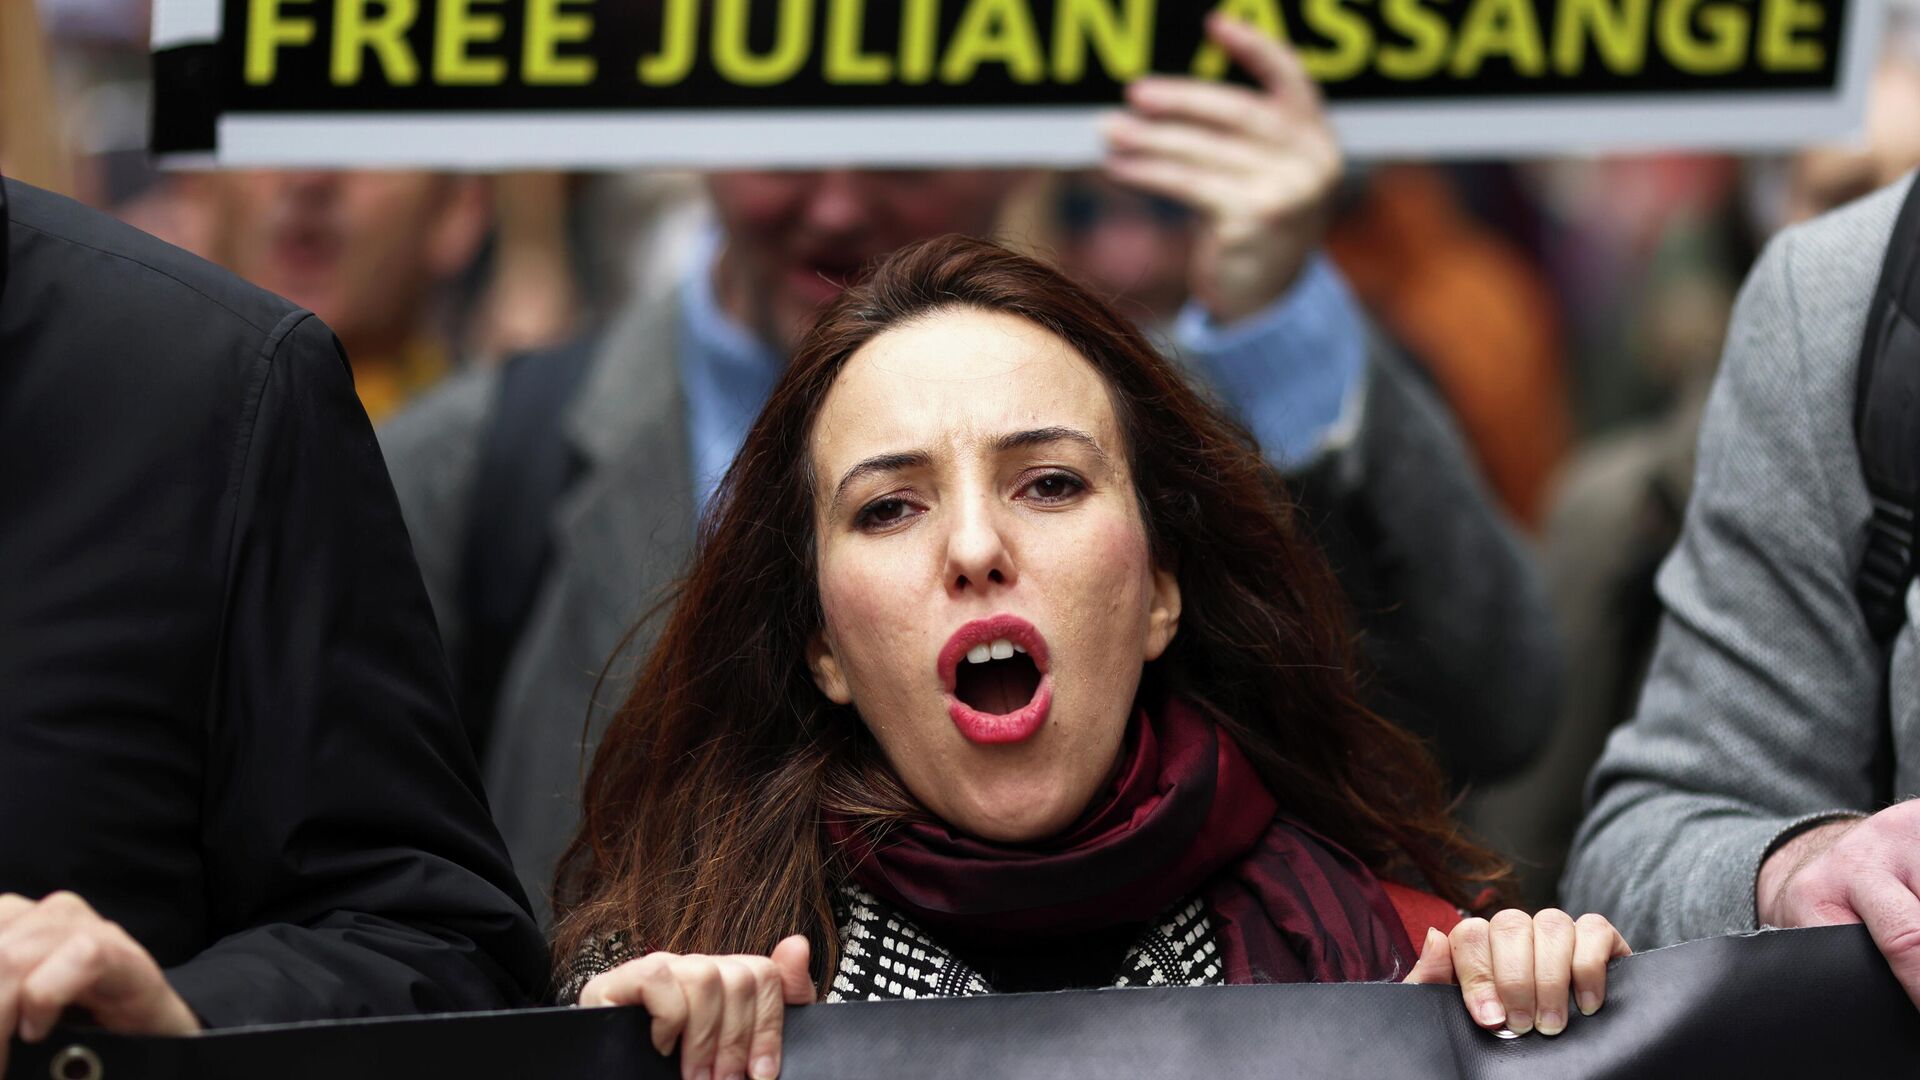 Partner of WikiLeaks founder Julian Assange, Stella Morris attends a protest ahead of the appeal hearing over Assange's extradition, in London, Britain October 23, 2021 - Sputnik International, 1920, 25.10.2021